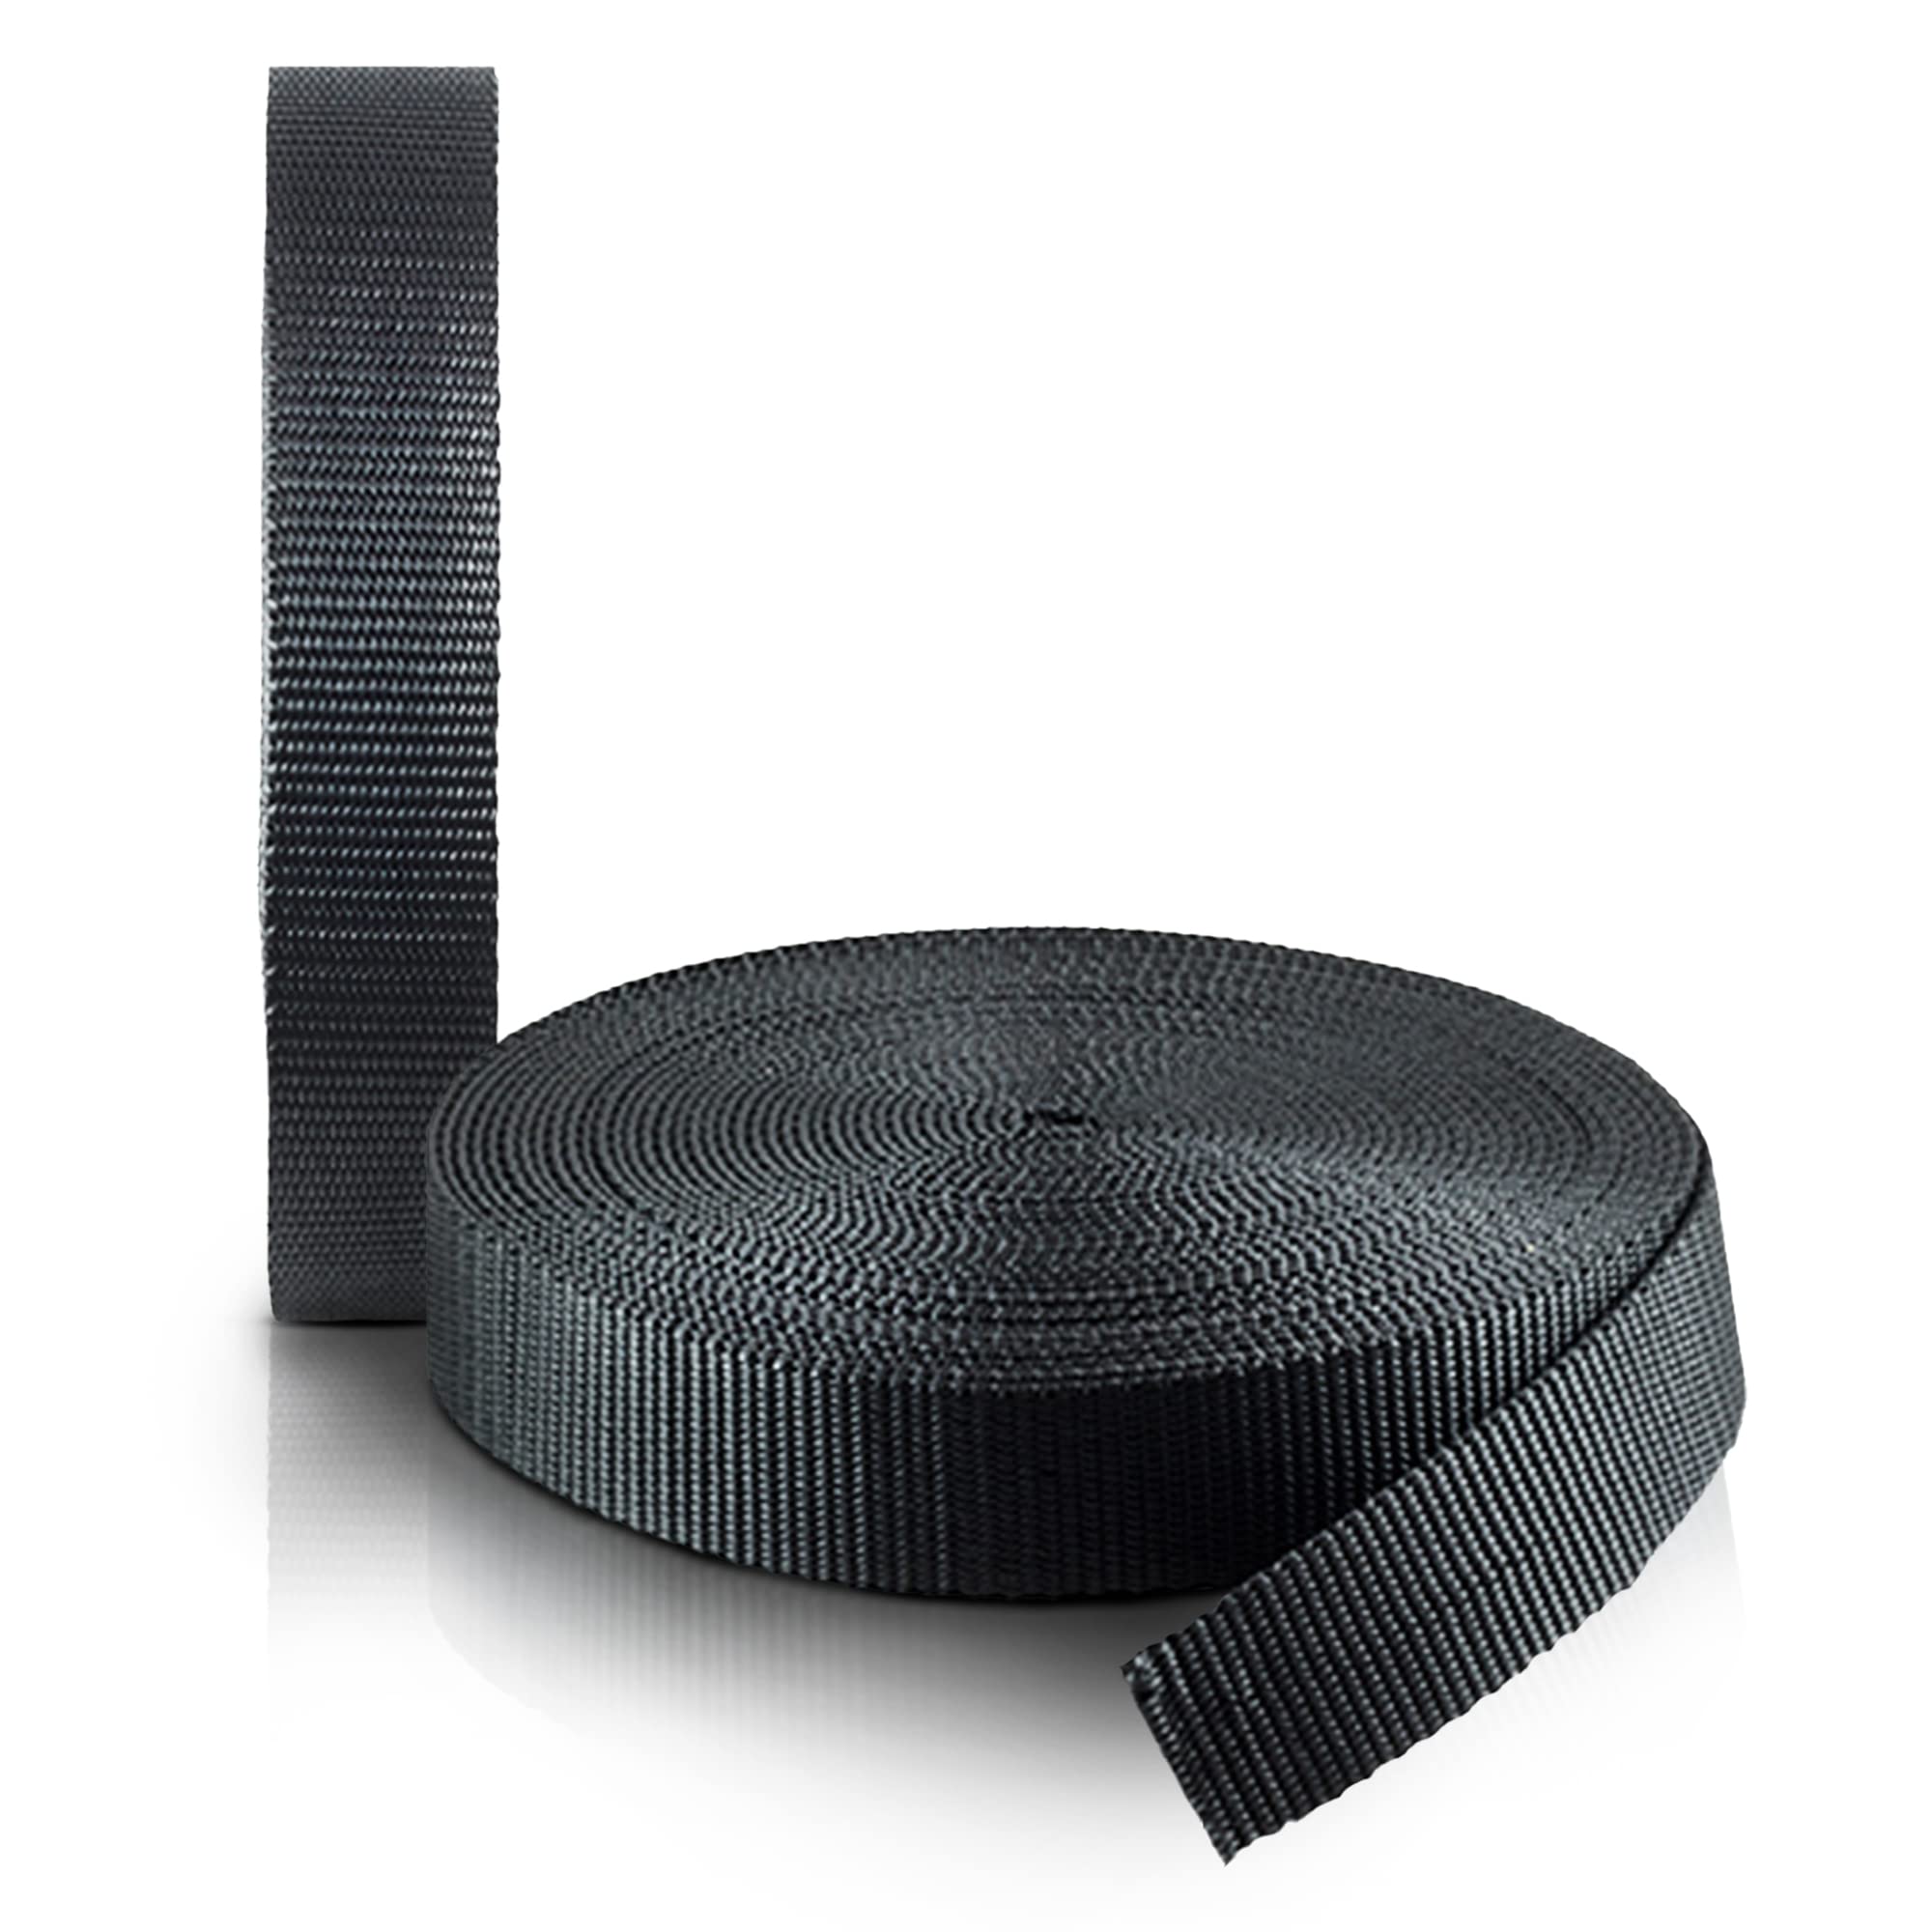 Houseables Nylon Strapping, Webbing Material, 1 Inch W x 10 Yard, Black,  Heavy Climbing Flat Strap, UV Resistant Fabric, Web for Bags, Backpacks,  Belts, Harnesses, Slings, Collars, Tow Ropes